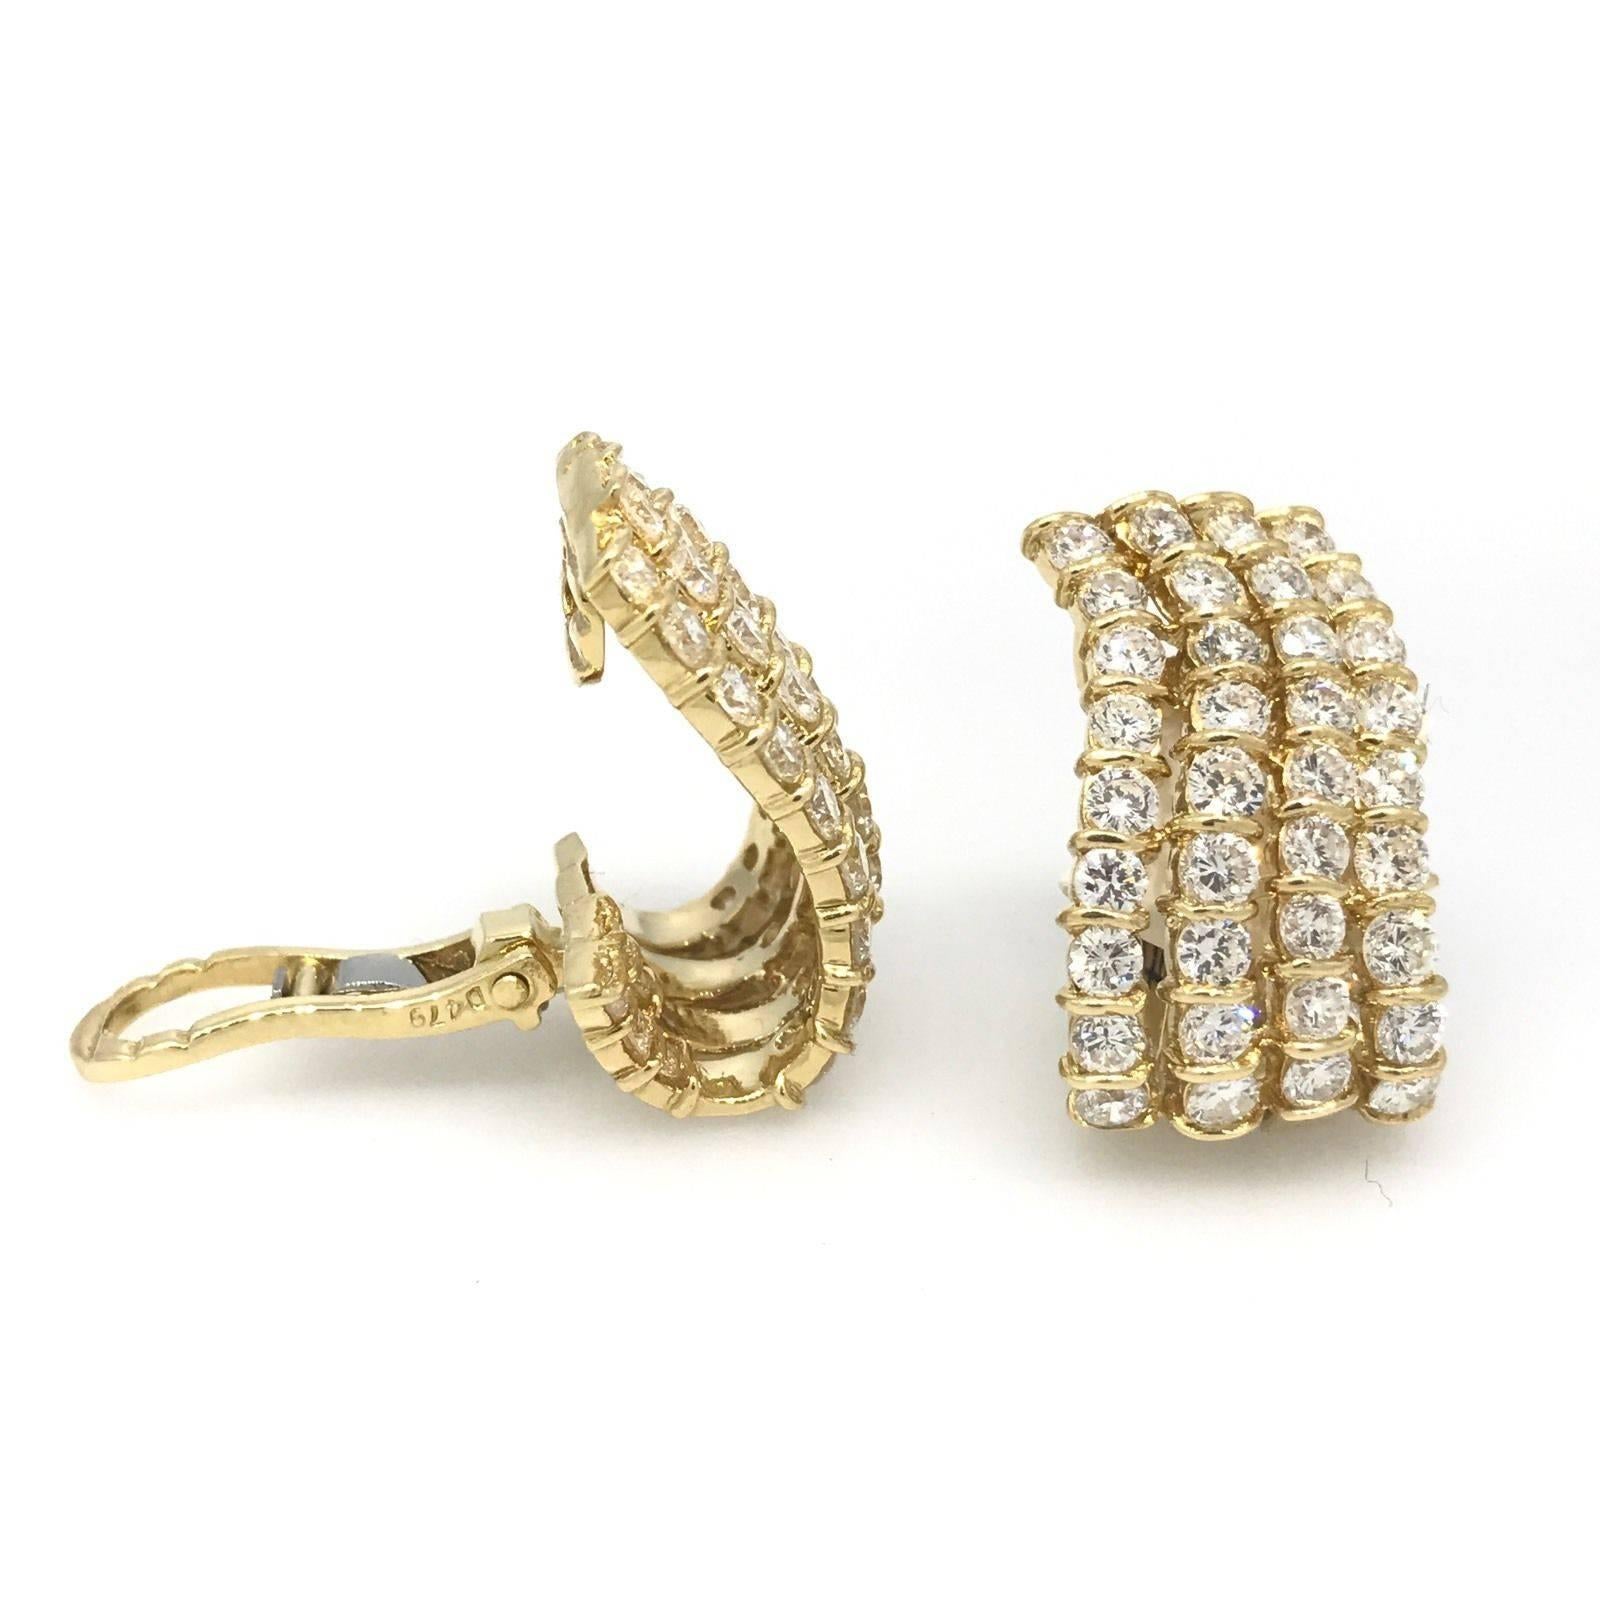 Pair of Four-Row Channel-Set Diamond Earrings in 18 Karat Yellow Gold In Excellent Condition For Sale In La Jolla, CA